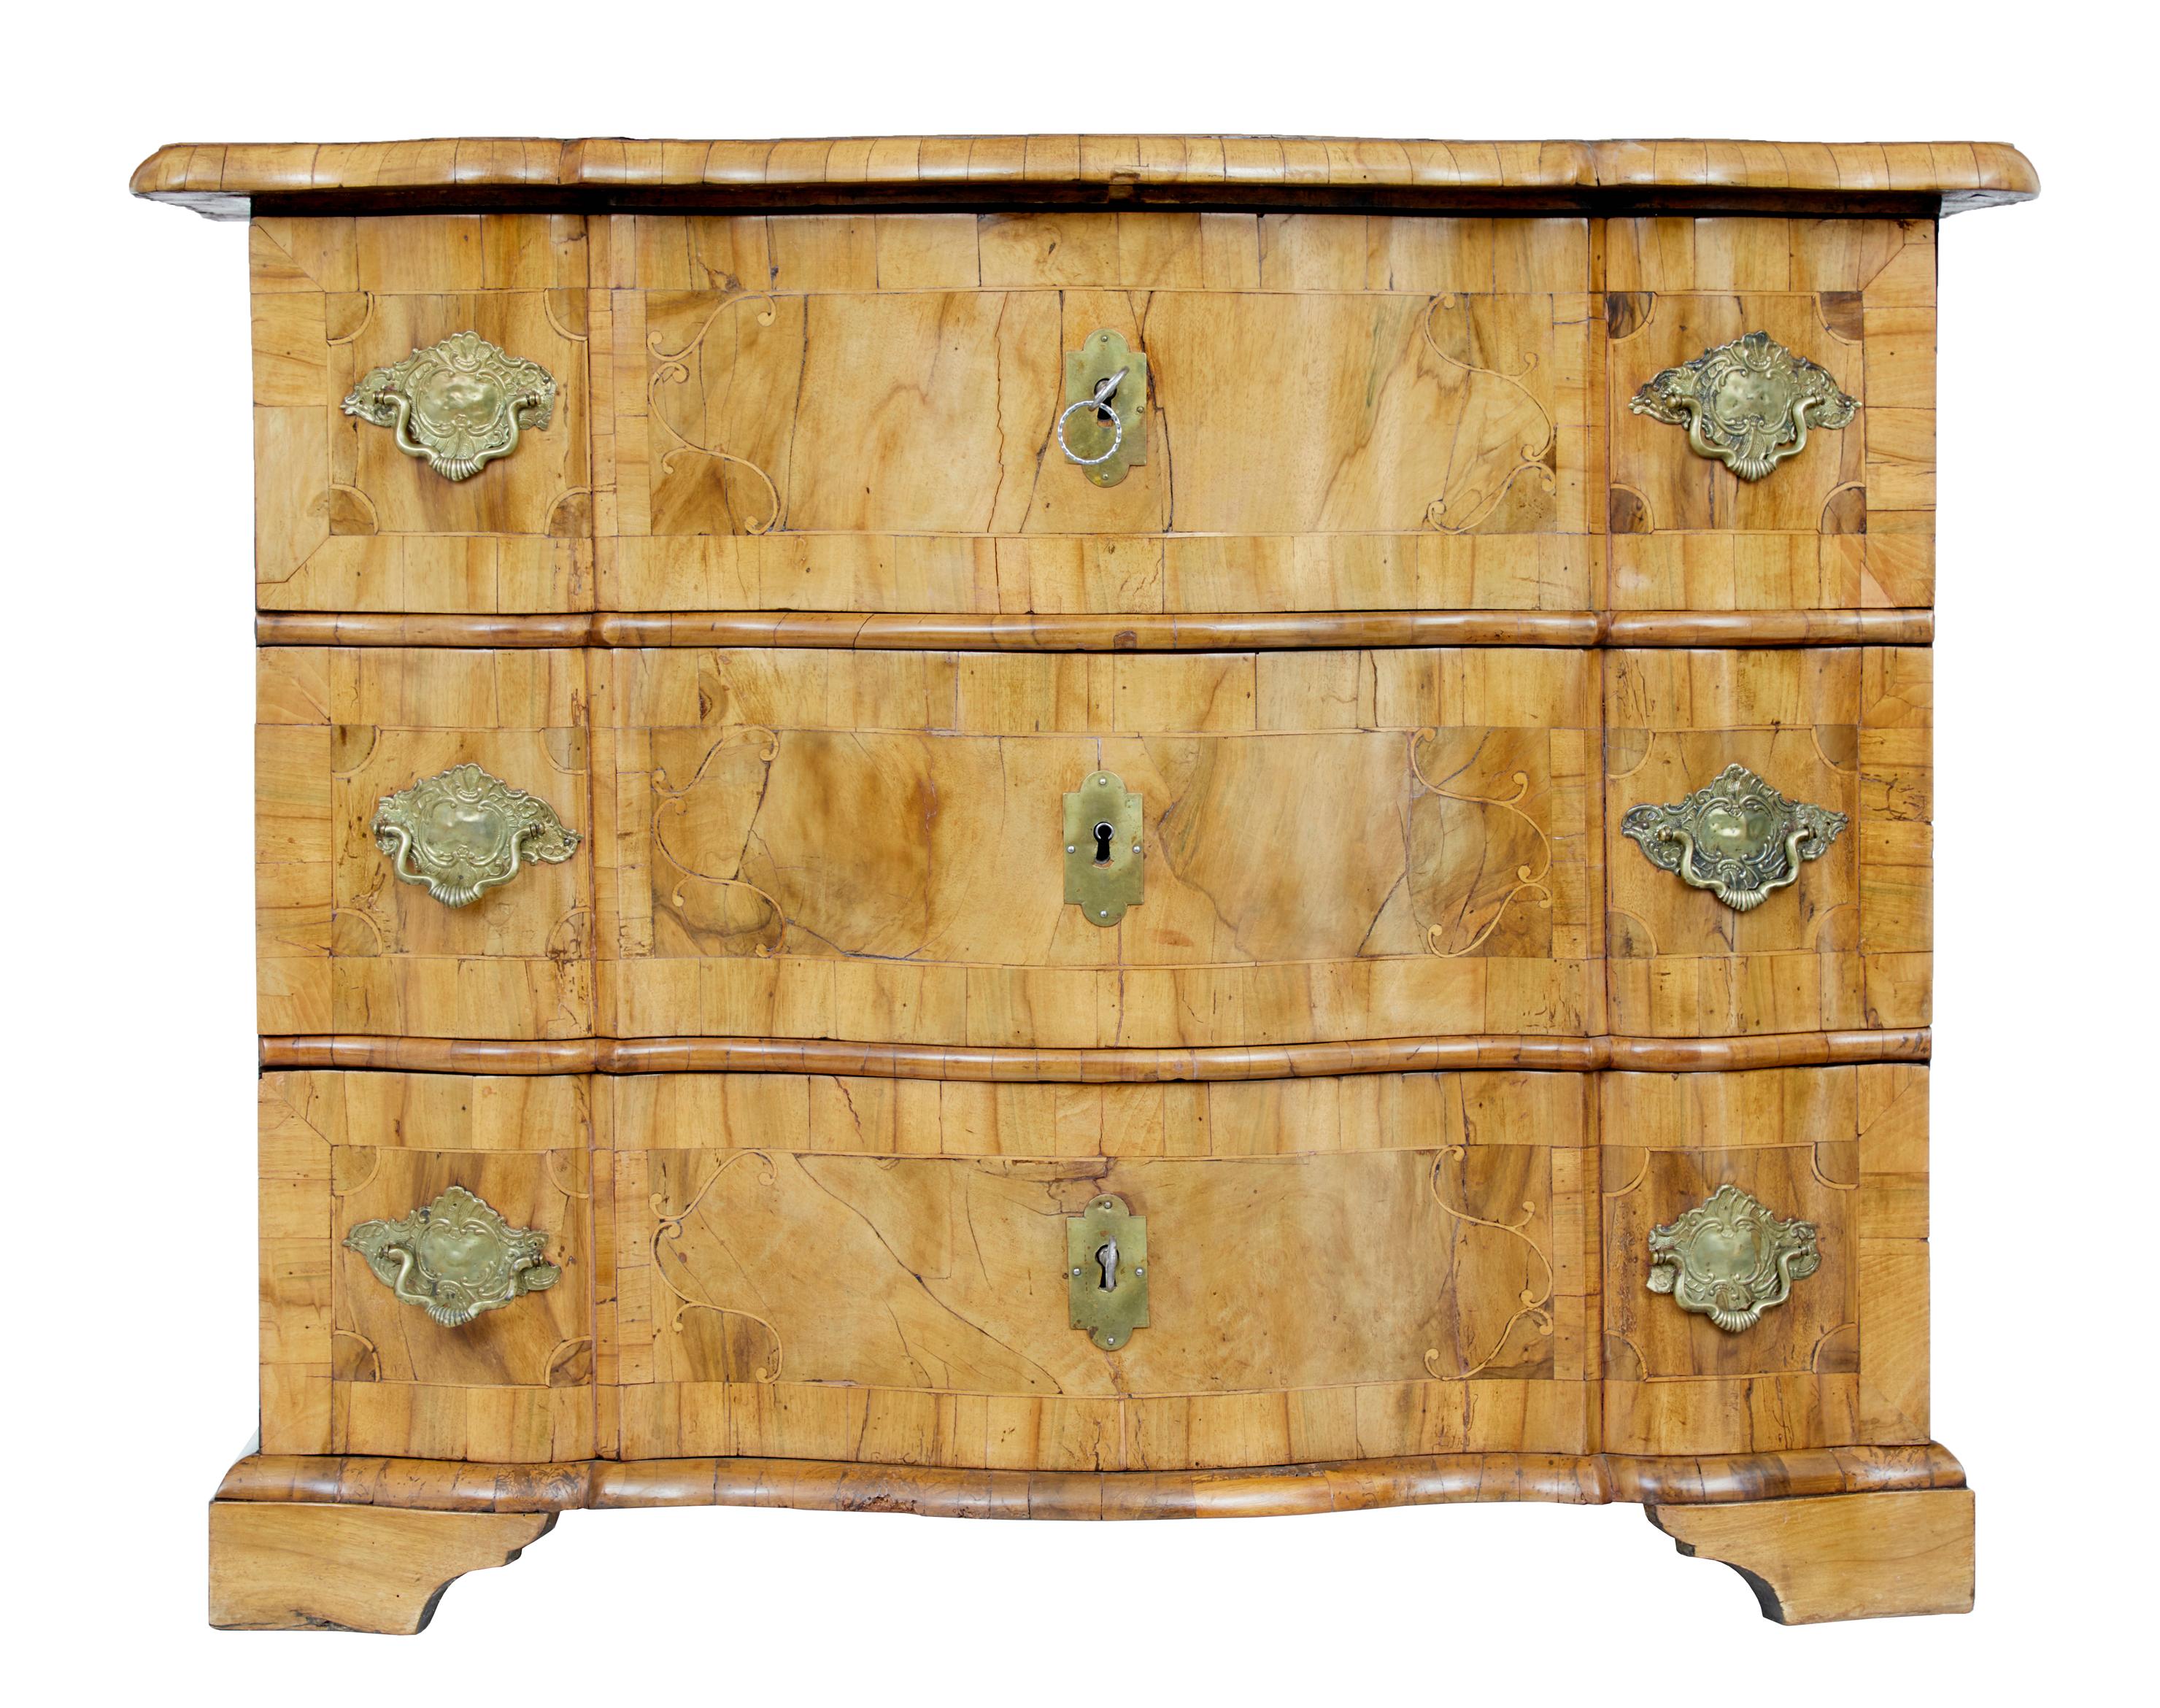 Fine quality Swedish commode, circa 1730.

Beautiful natural color which has taken nearly 300 years to develop. Serpentine over sailing top. 3 shaped drawer fronts with inlay and stringing. Top with inlaid hunting scene.

Replaced back and